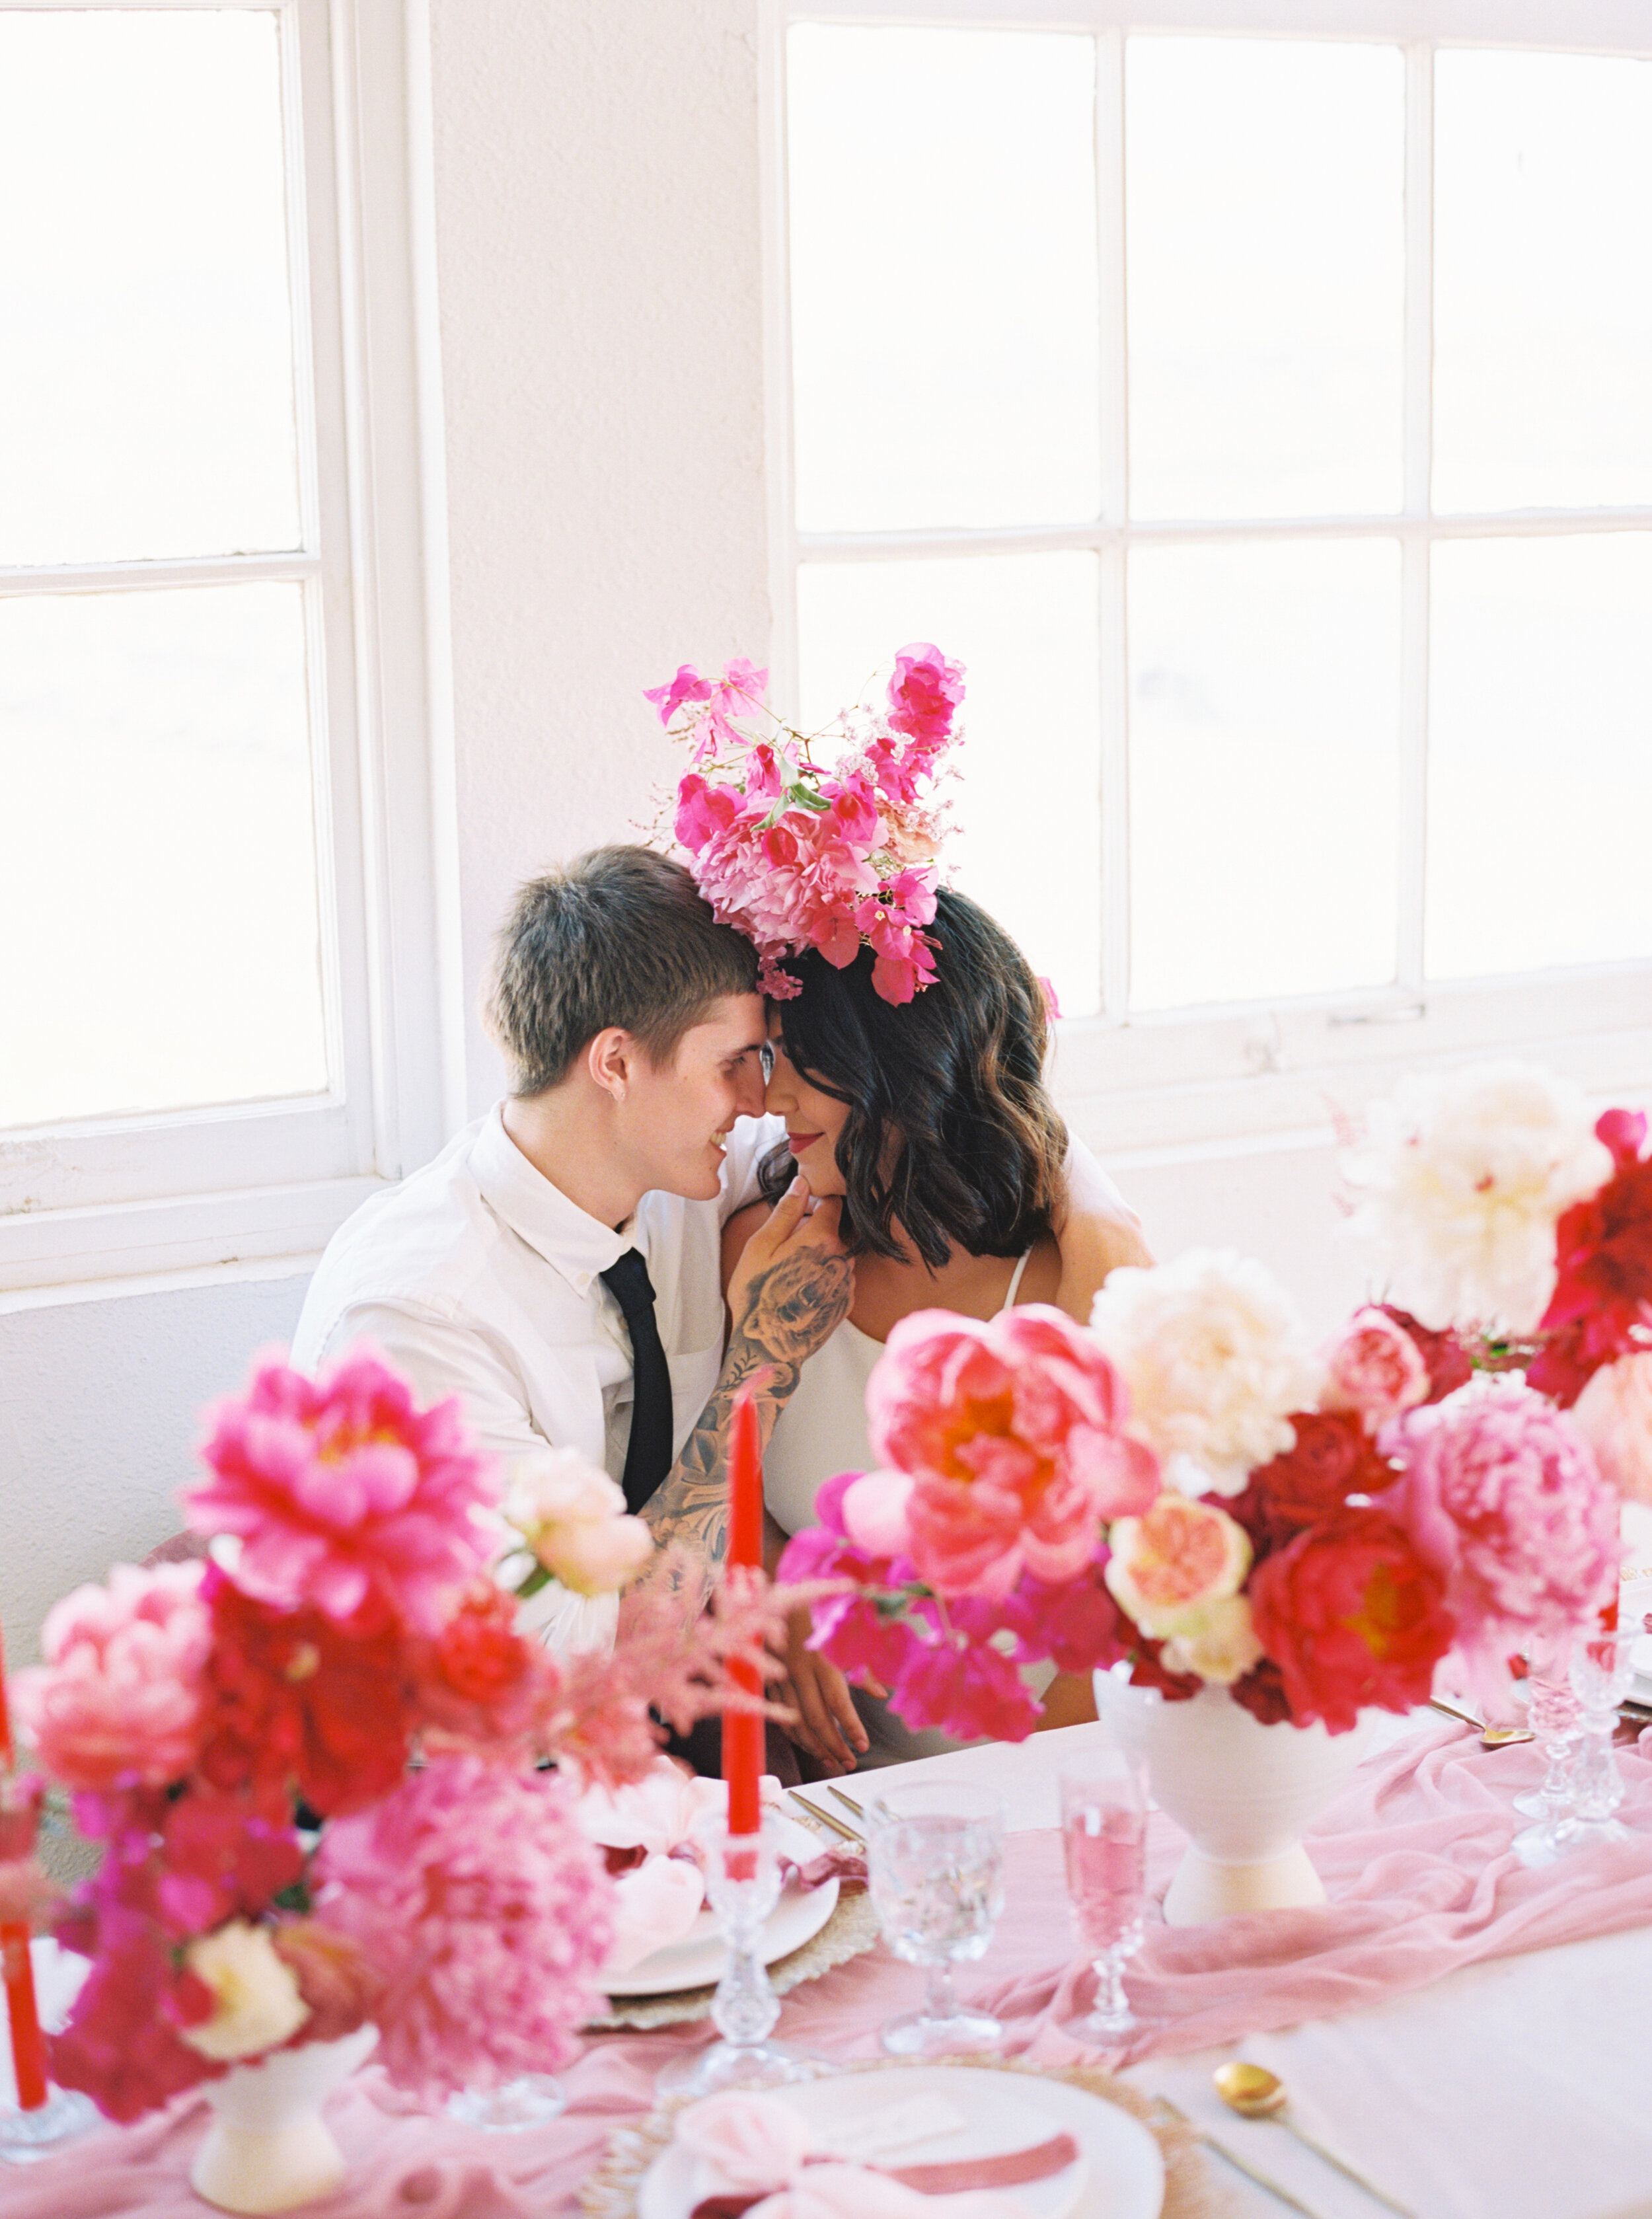 A Romantic Wedding Elopement Filled with Colorful Fuchsia - Sarahi Hadden Submission-23.jpg